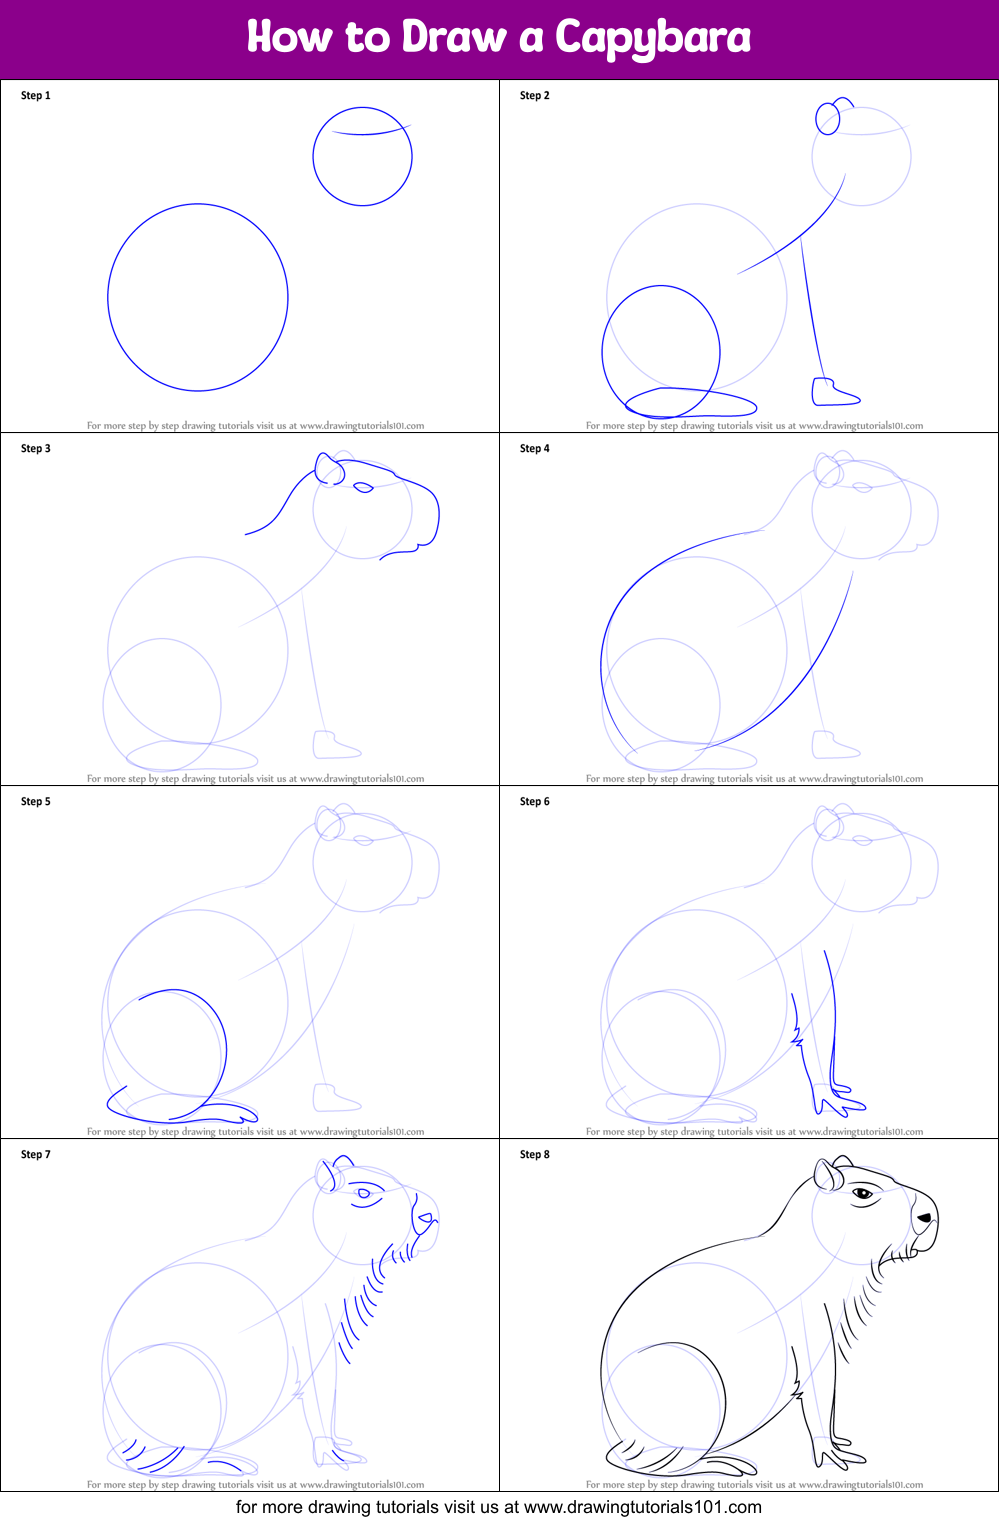 How to Draw a Capybara printable step by step drawing sheet